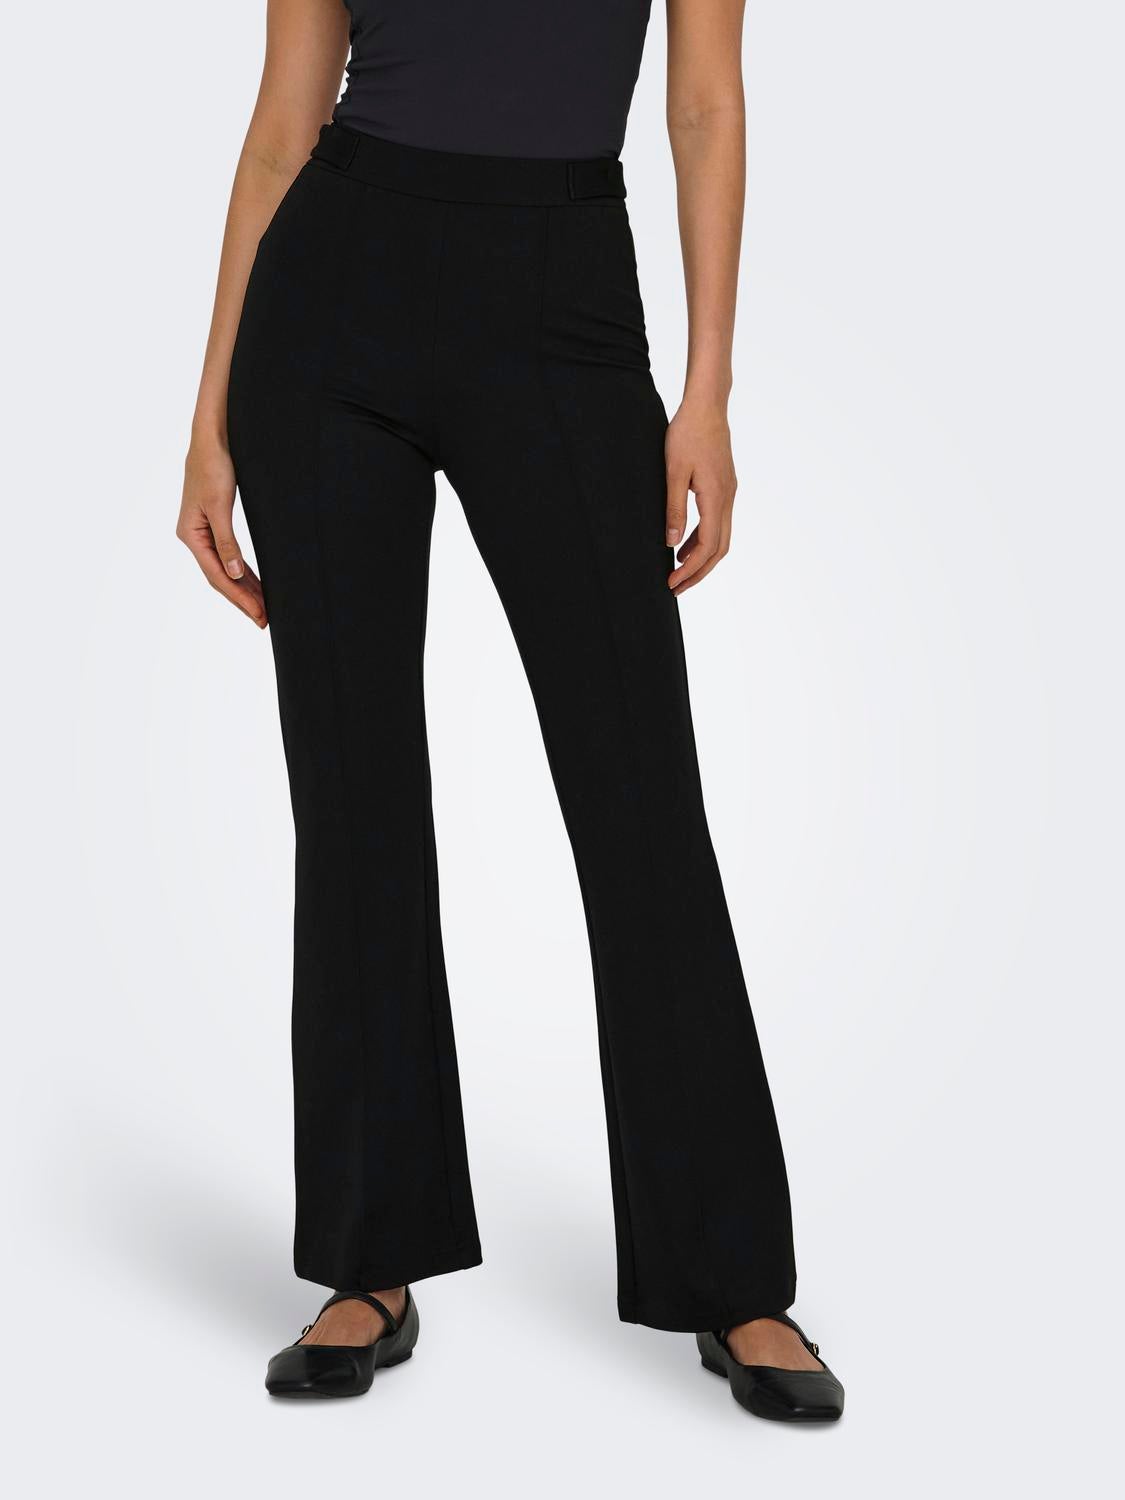 TOPSHOP Faux Leather Lace Up Flare Pants in Black | Lyst UK